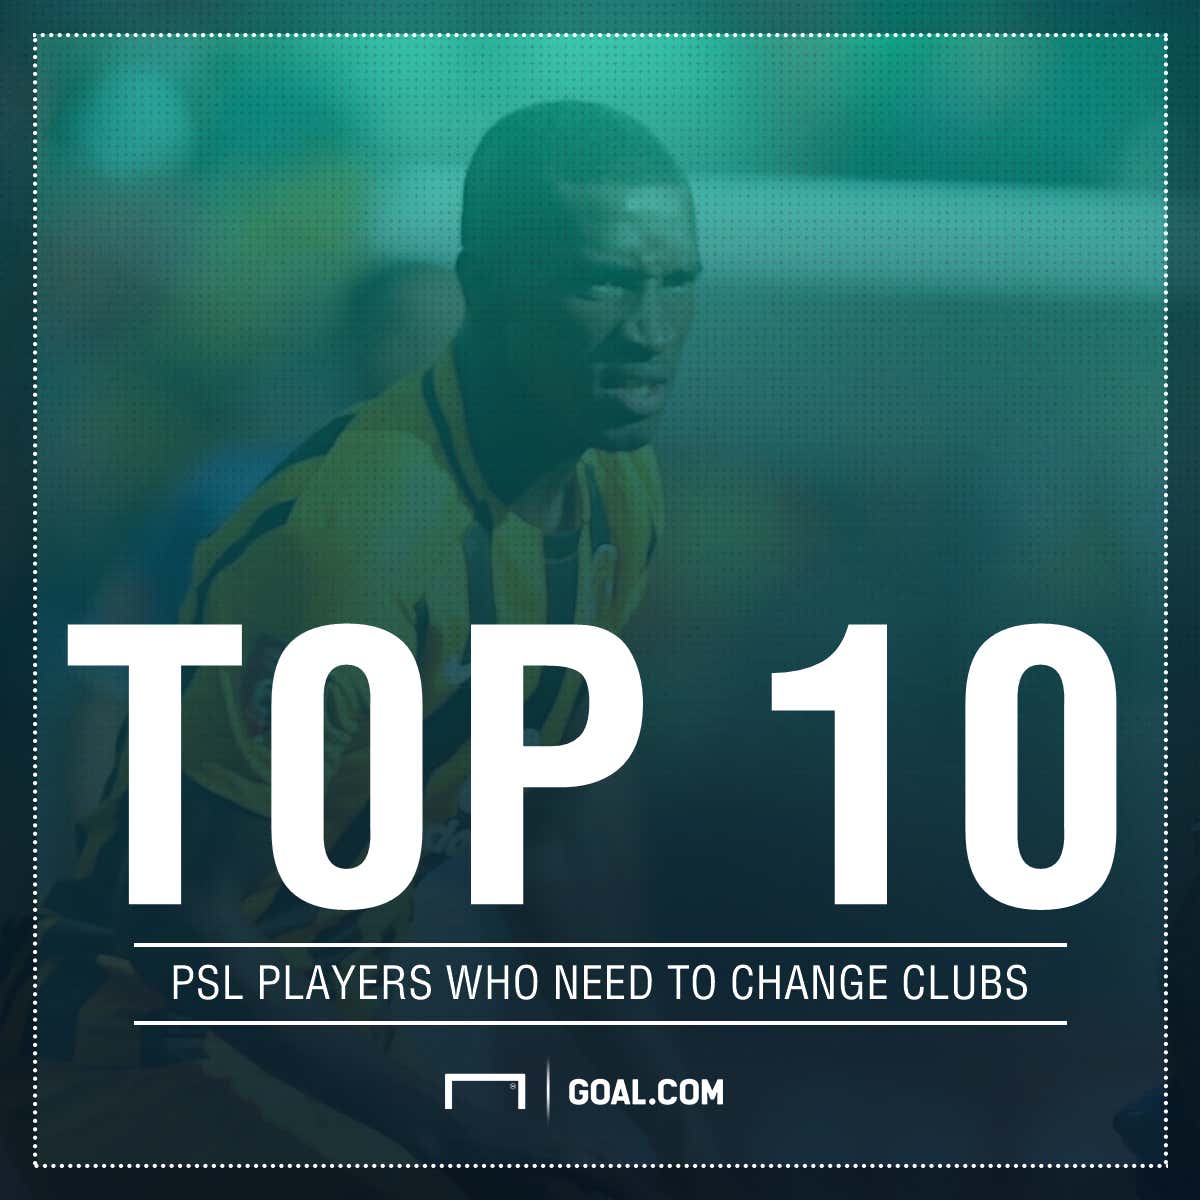 Top 10 PSL players who need to change clubs